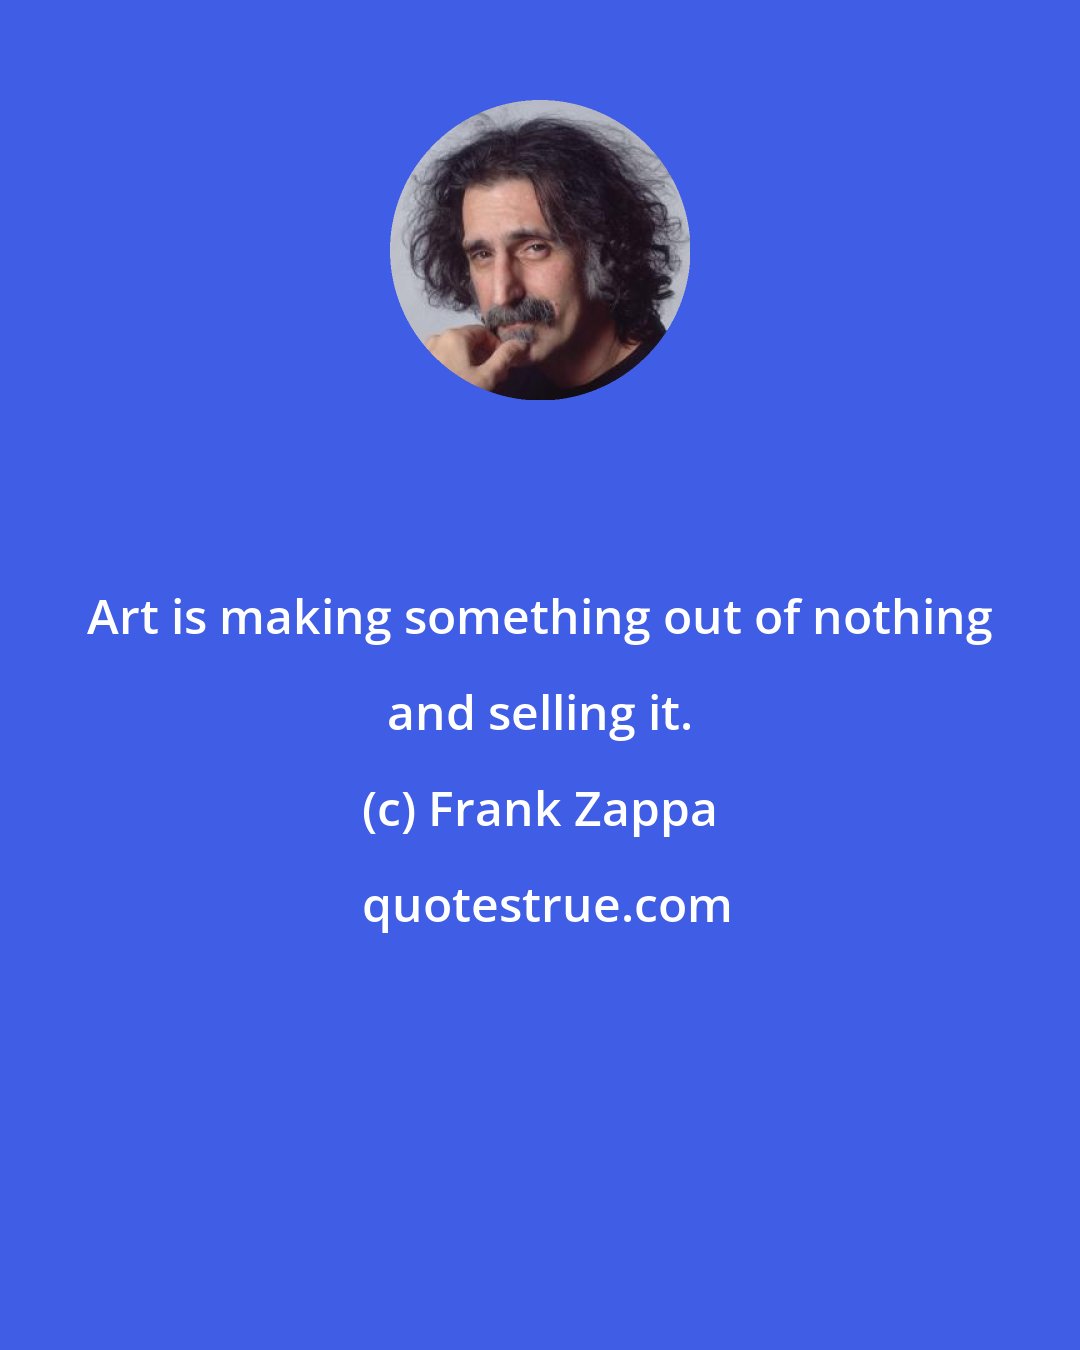 Frank Zappa: Art is making something out of nothing and selling it.